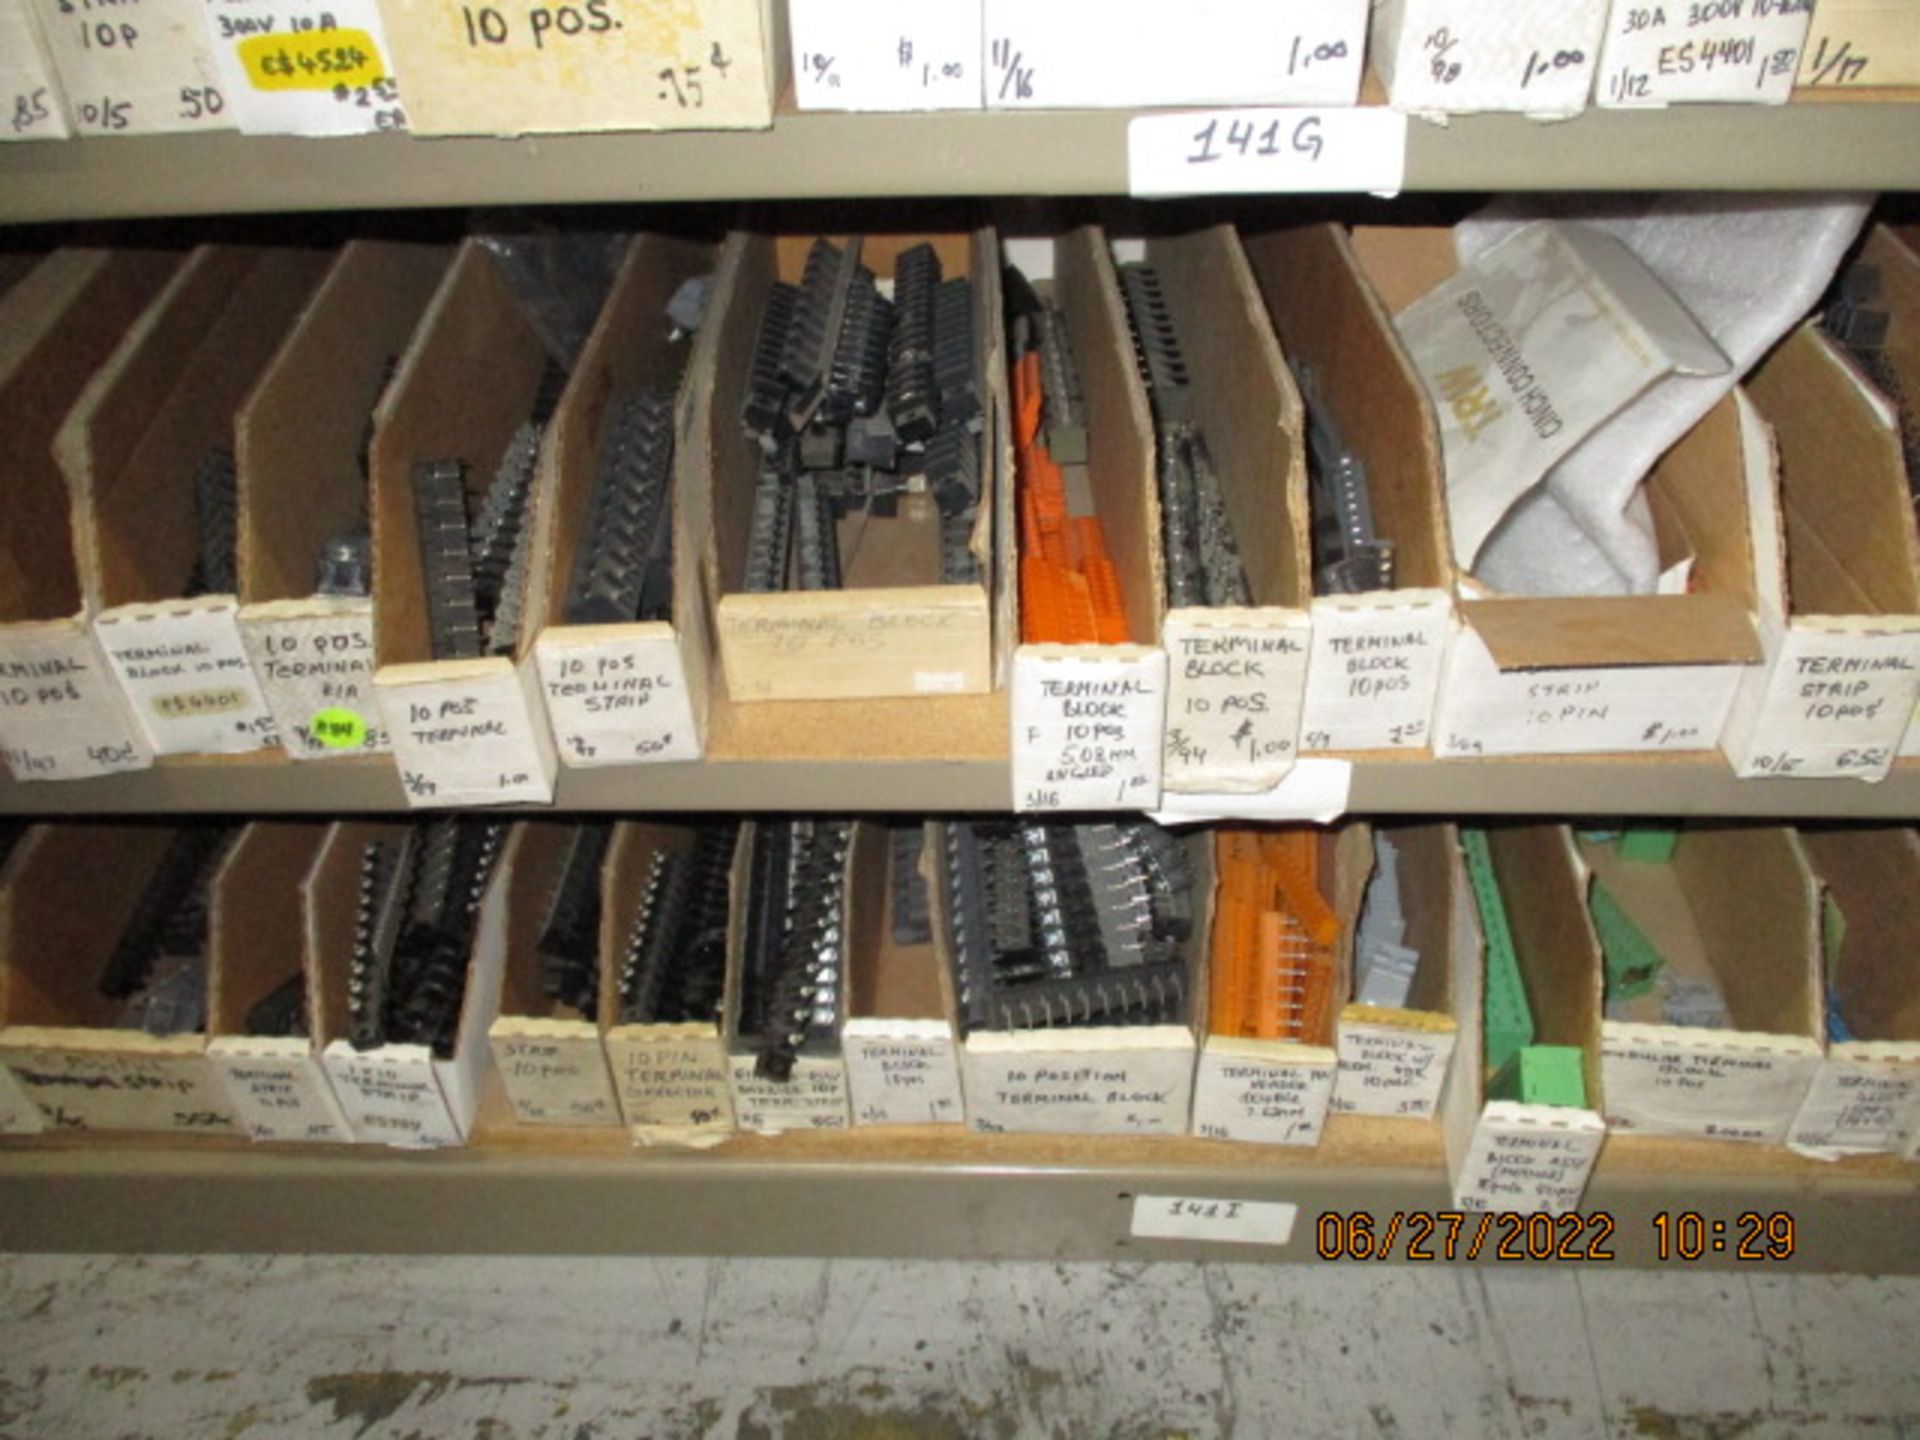 CONTENTS OF SHELVING UNIT CONSISTING OF INSULATORS, COVERS, 2-10 PIN CONNECTORS - Image 5 of 5